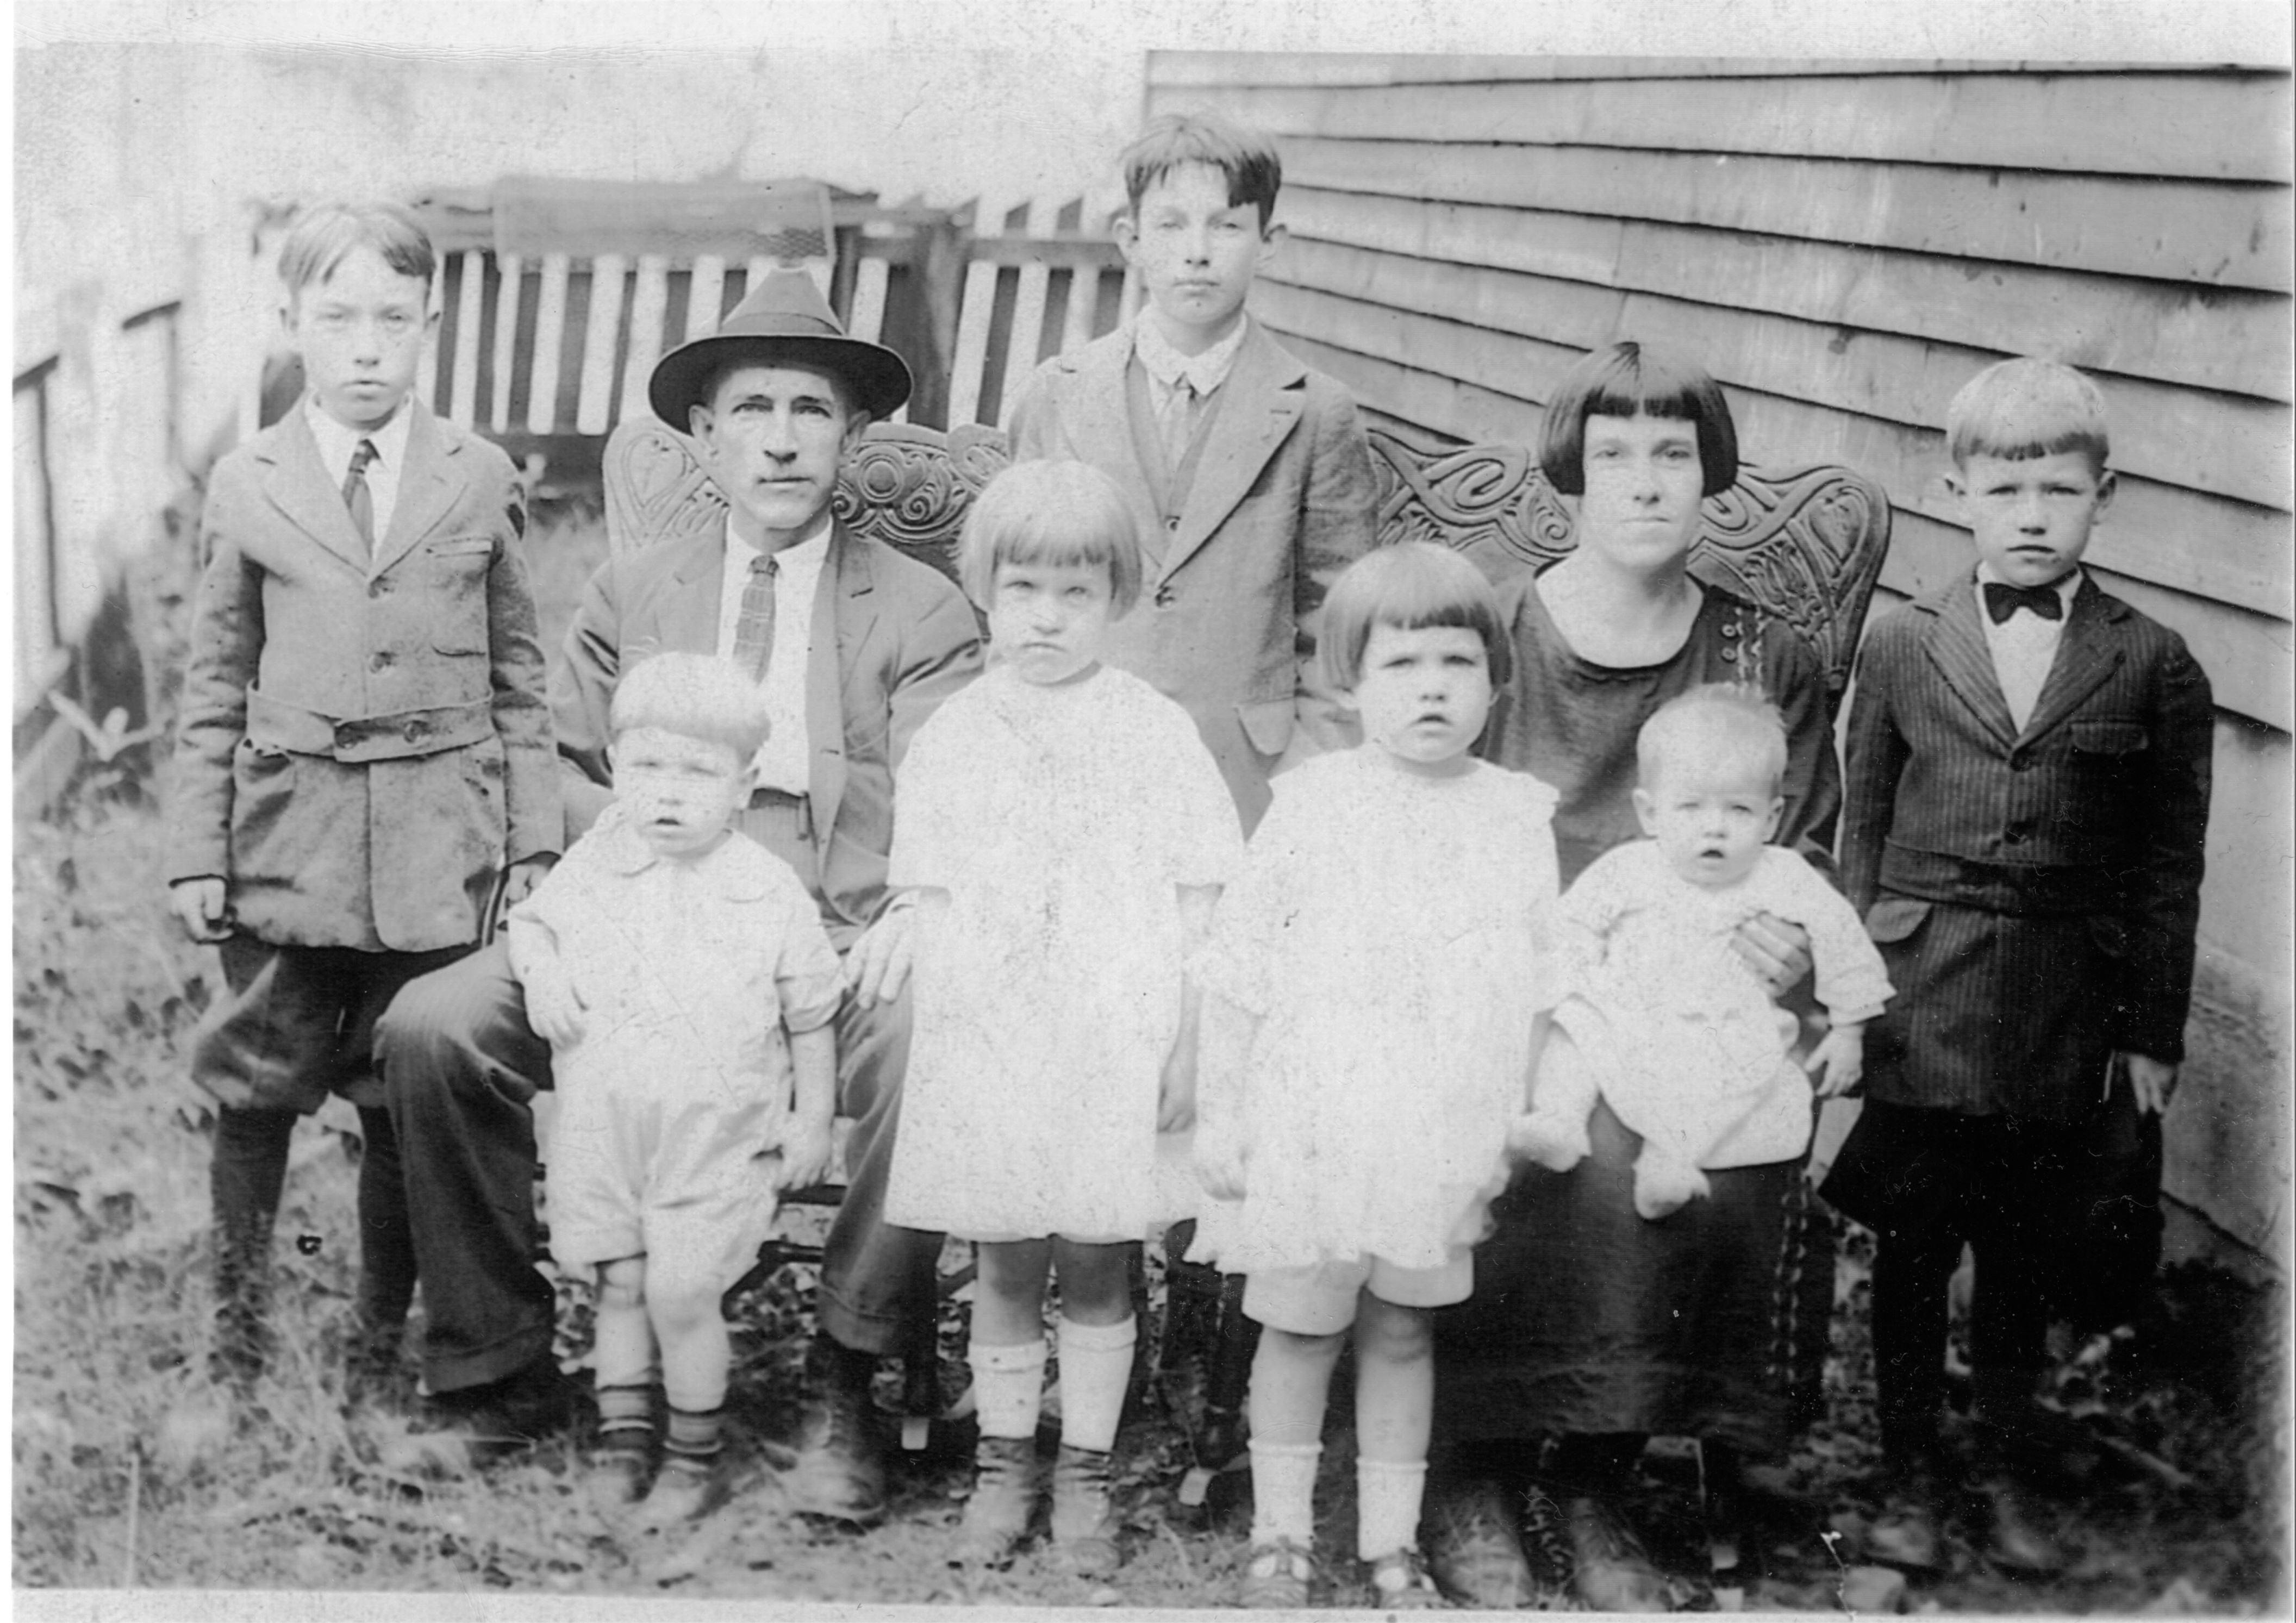 William and Fannie Baber Family, West Virginia